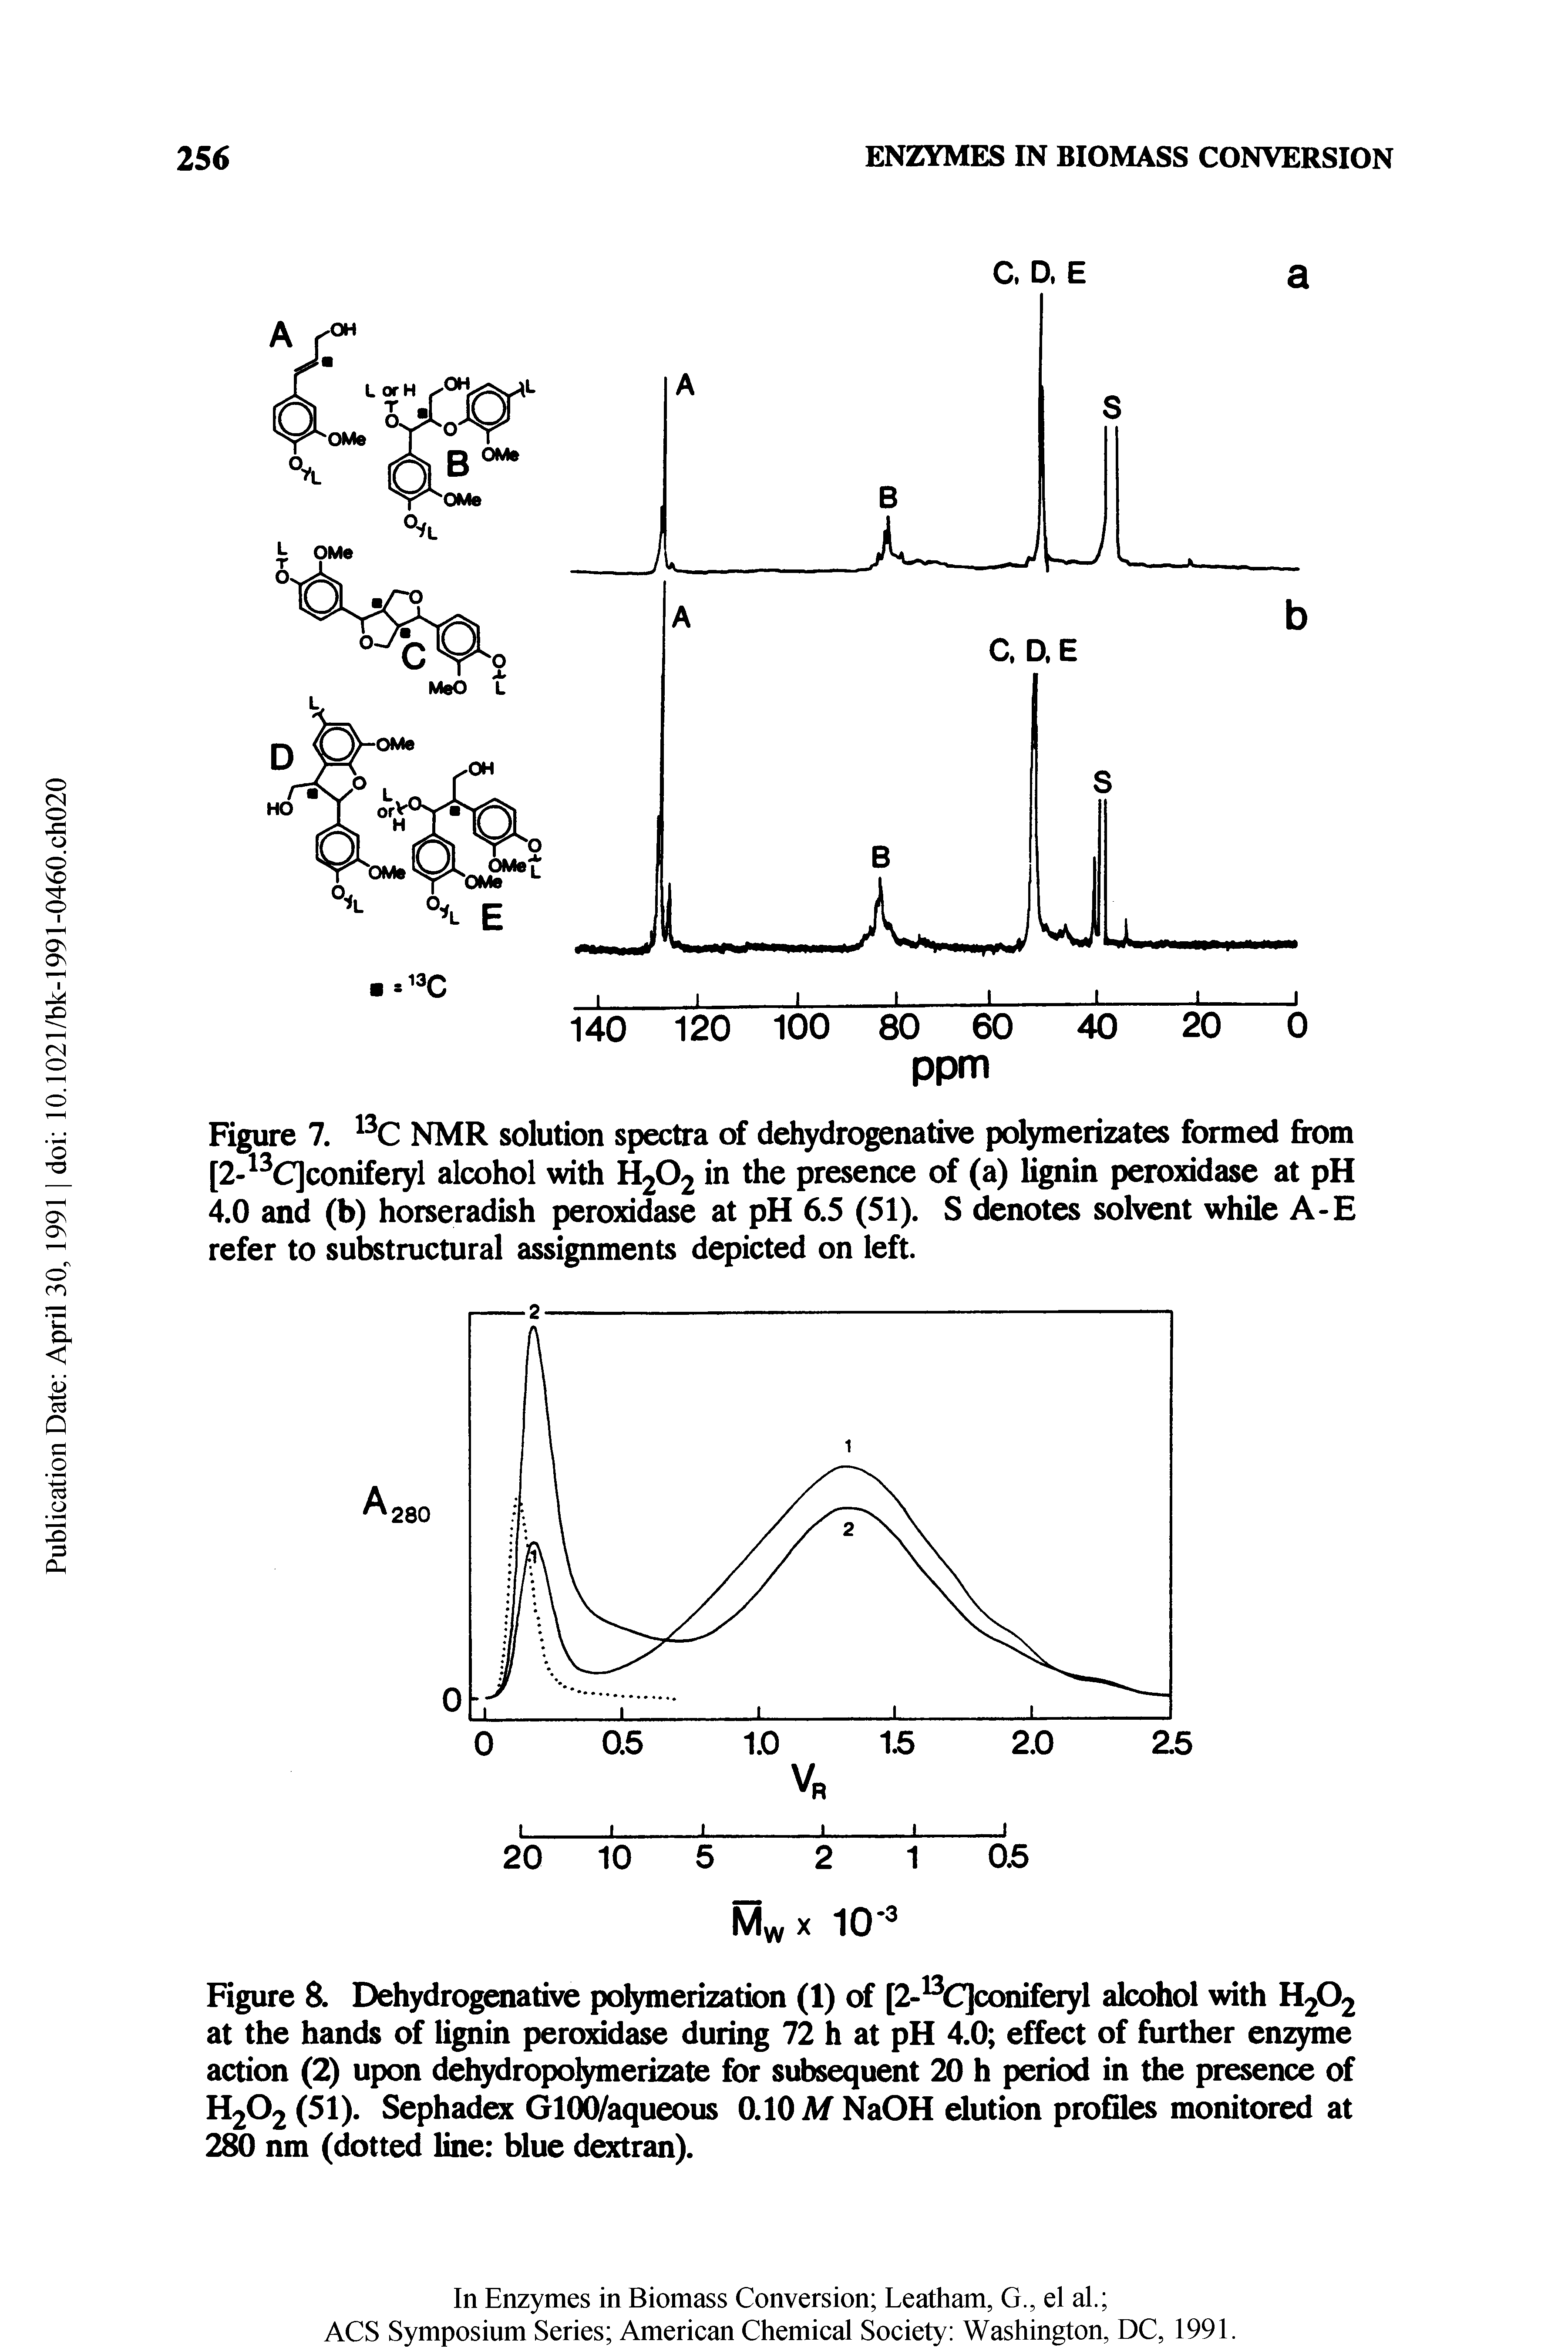 Figure 8. Dehydrogenative po erization (1) of [2- C]coniferyl alcohol with H2O2 at the hands of lignin peroxidase during 72 h at pH 4.0 effect of further enzyme action (2) upon dehydropolymerizate for subsequent 20 h period in the presence of H2O2 (51). Sephadex GlOO/aqueous O.IOM NaOH elution profiles monitored at 280 nm (dotted line blue d ran).